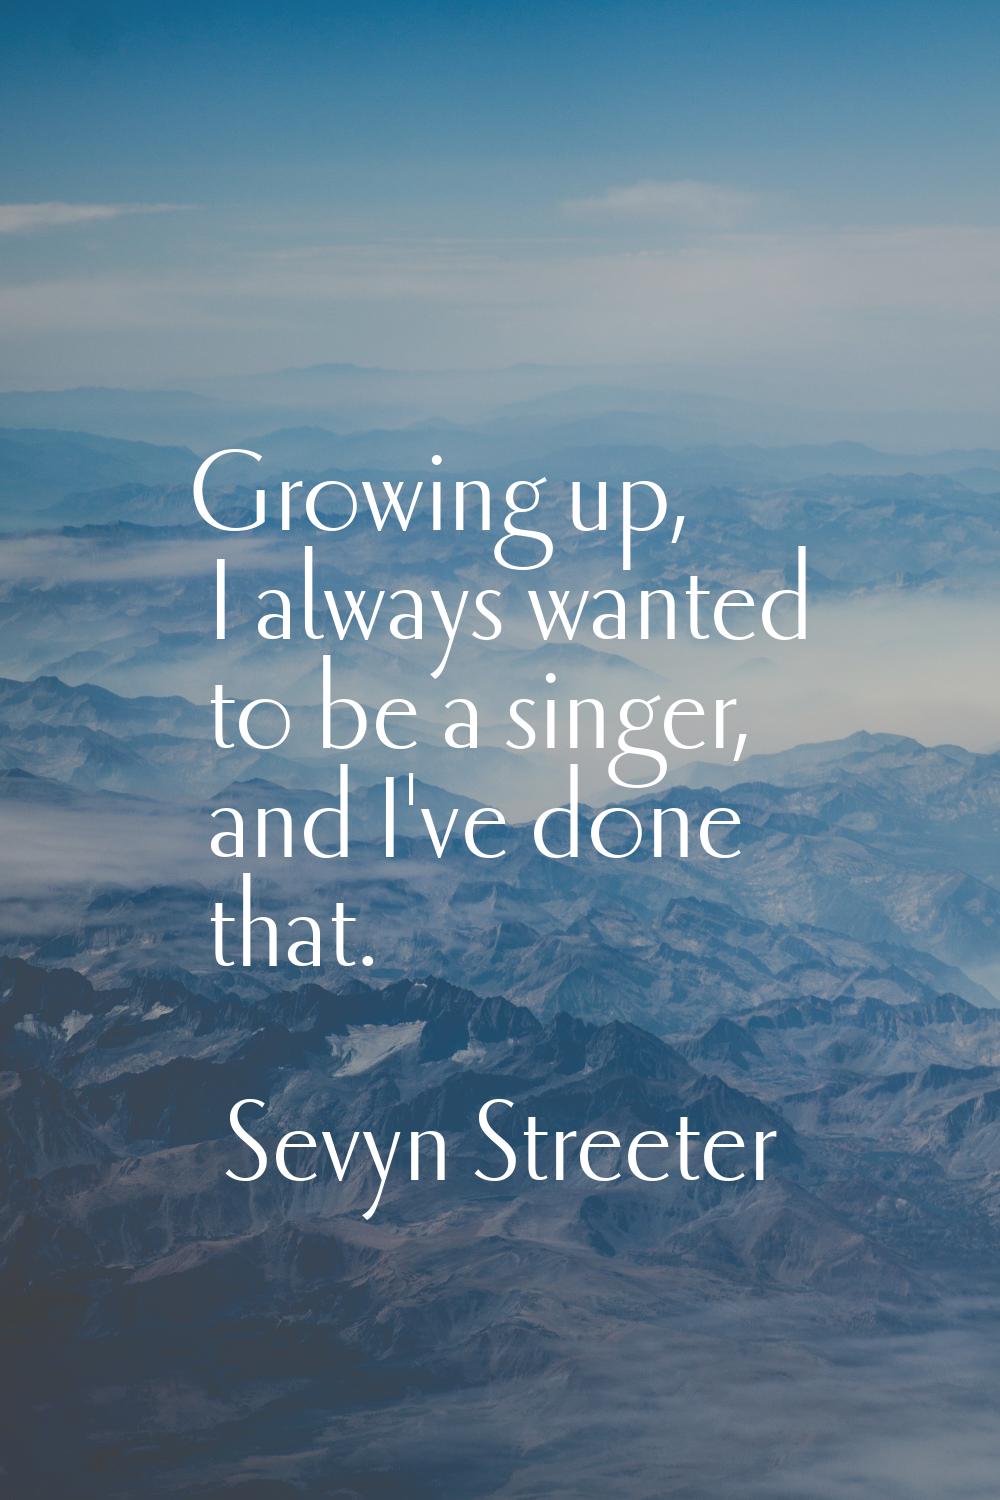 Growing up, I always wanted to be a singer, and I've done that.